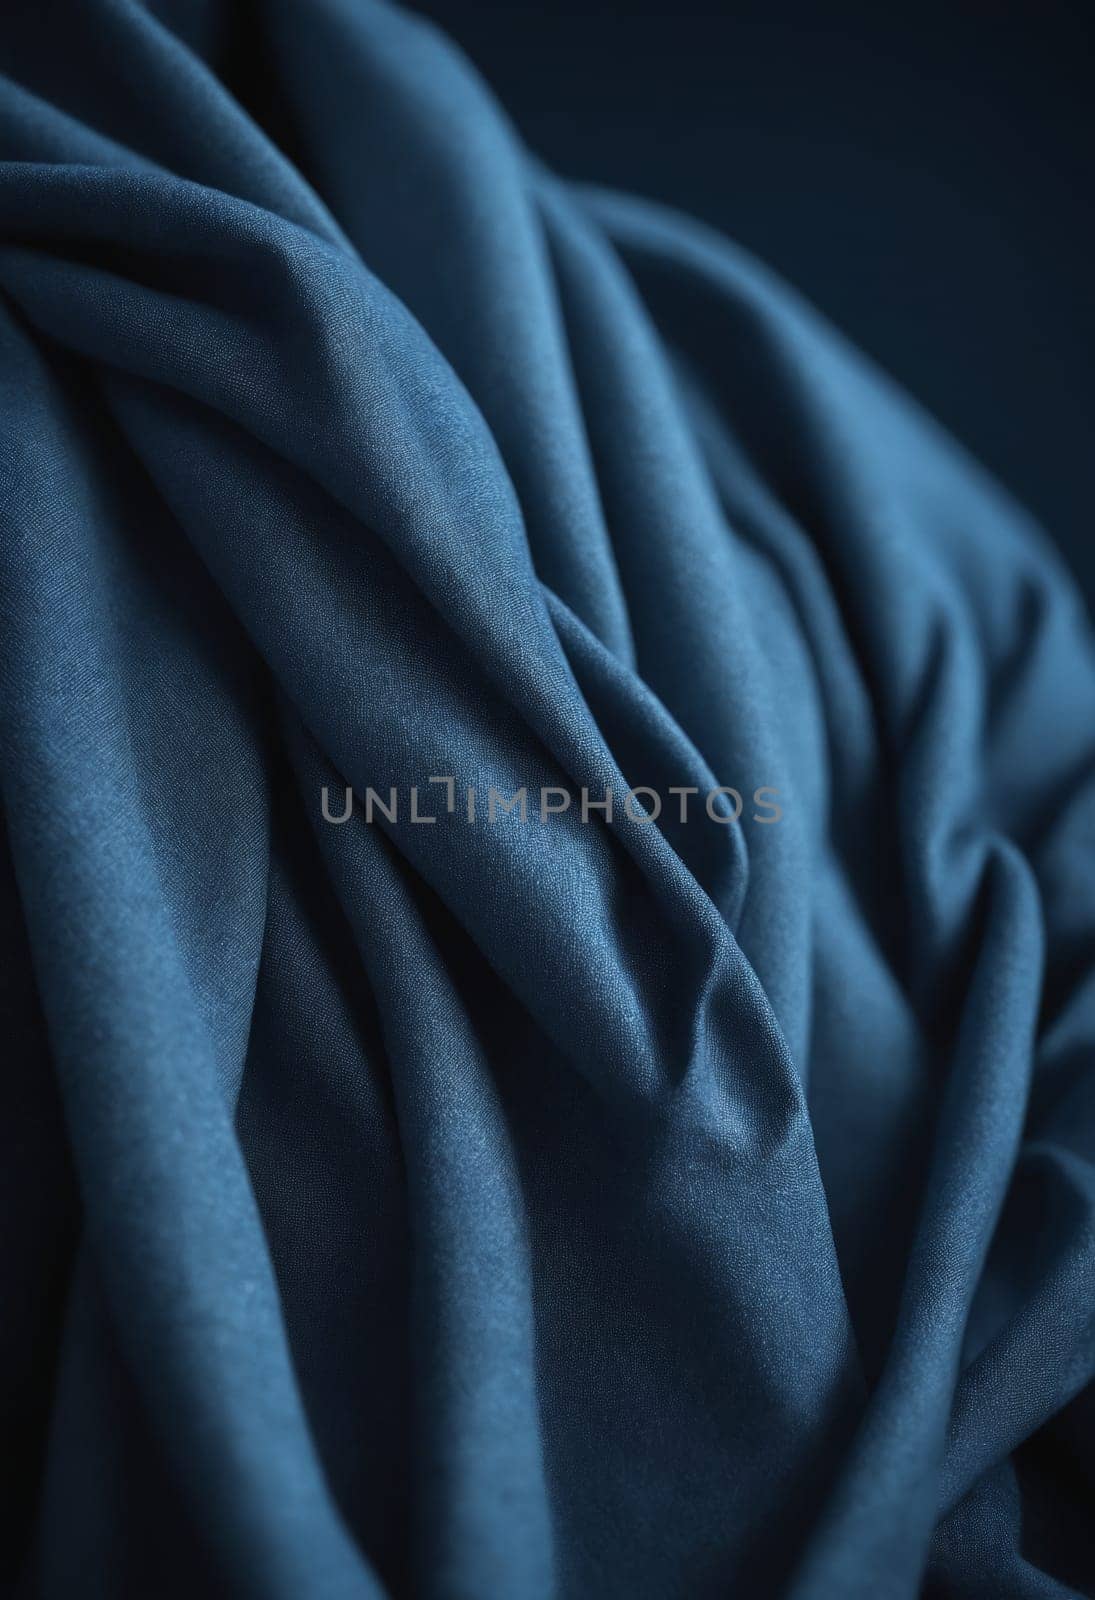 A close up of a sleeve made from electric blue satin fabric with tints and shades. The pattern contrasts against the darkness, perfect for sportswear or elegant events